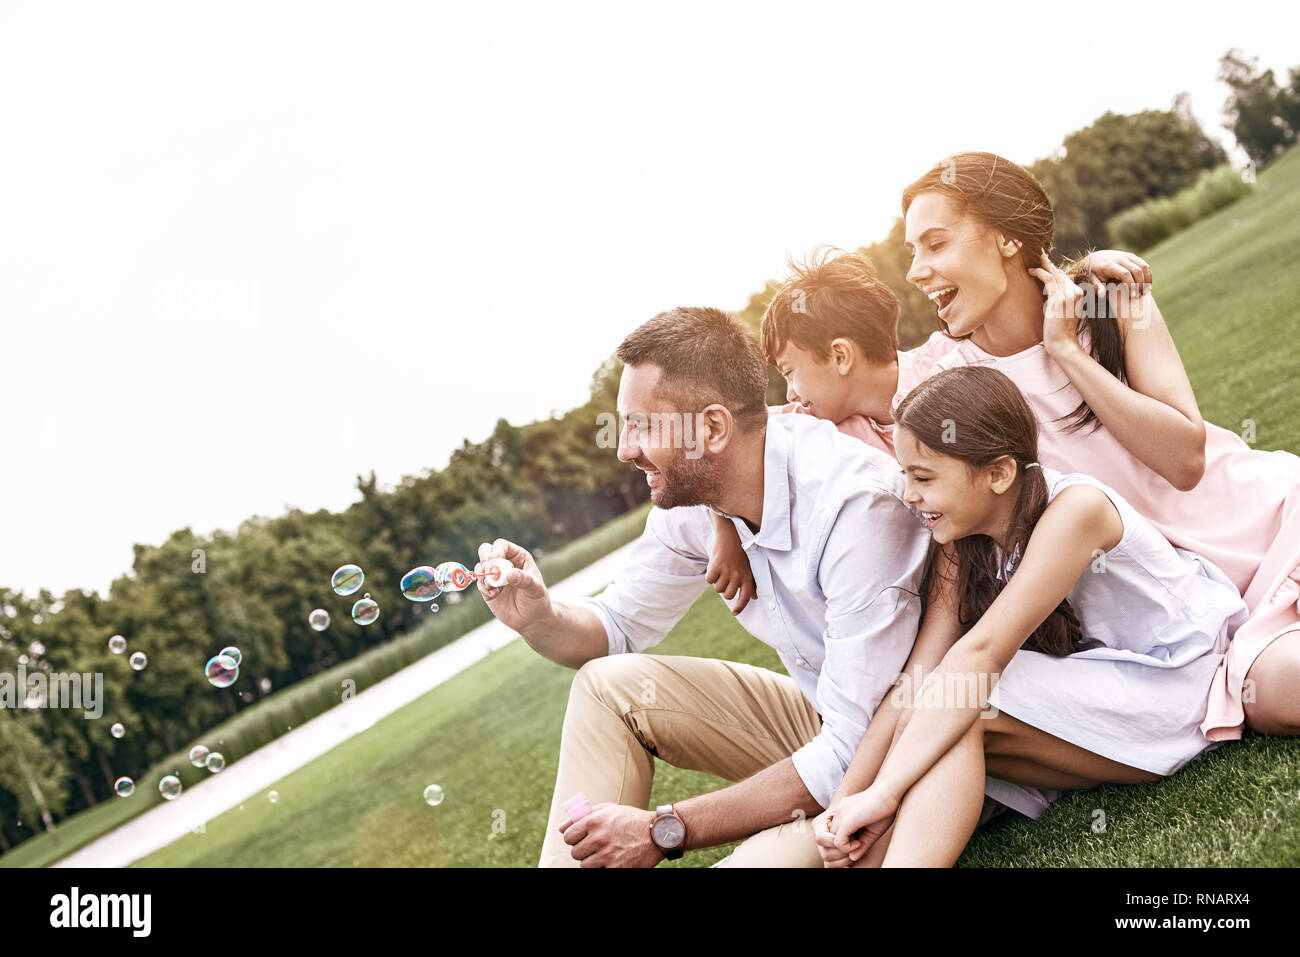 Bonding. Family of four sitting on a grassy field blowing bubbles smiling happy Stock Photo